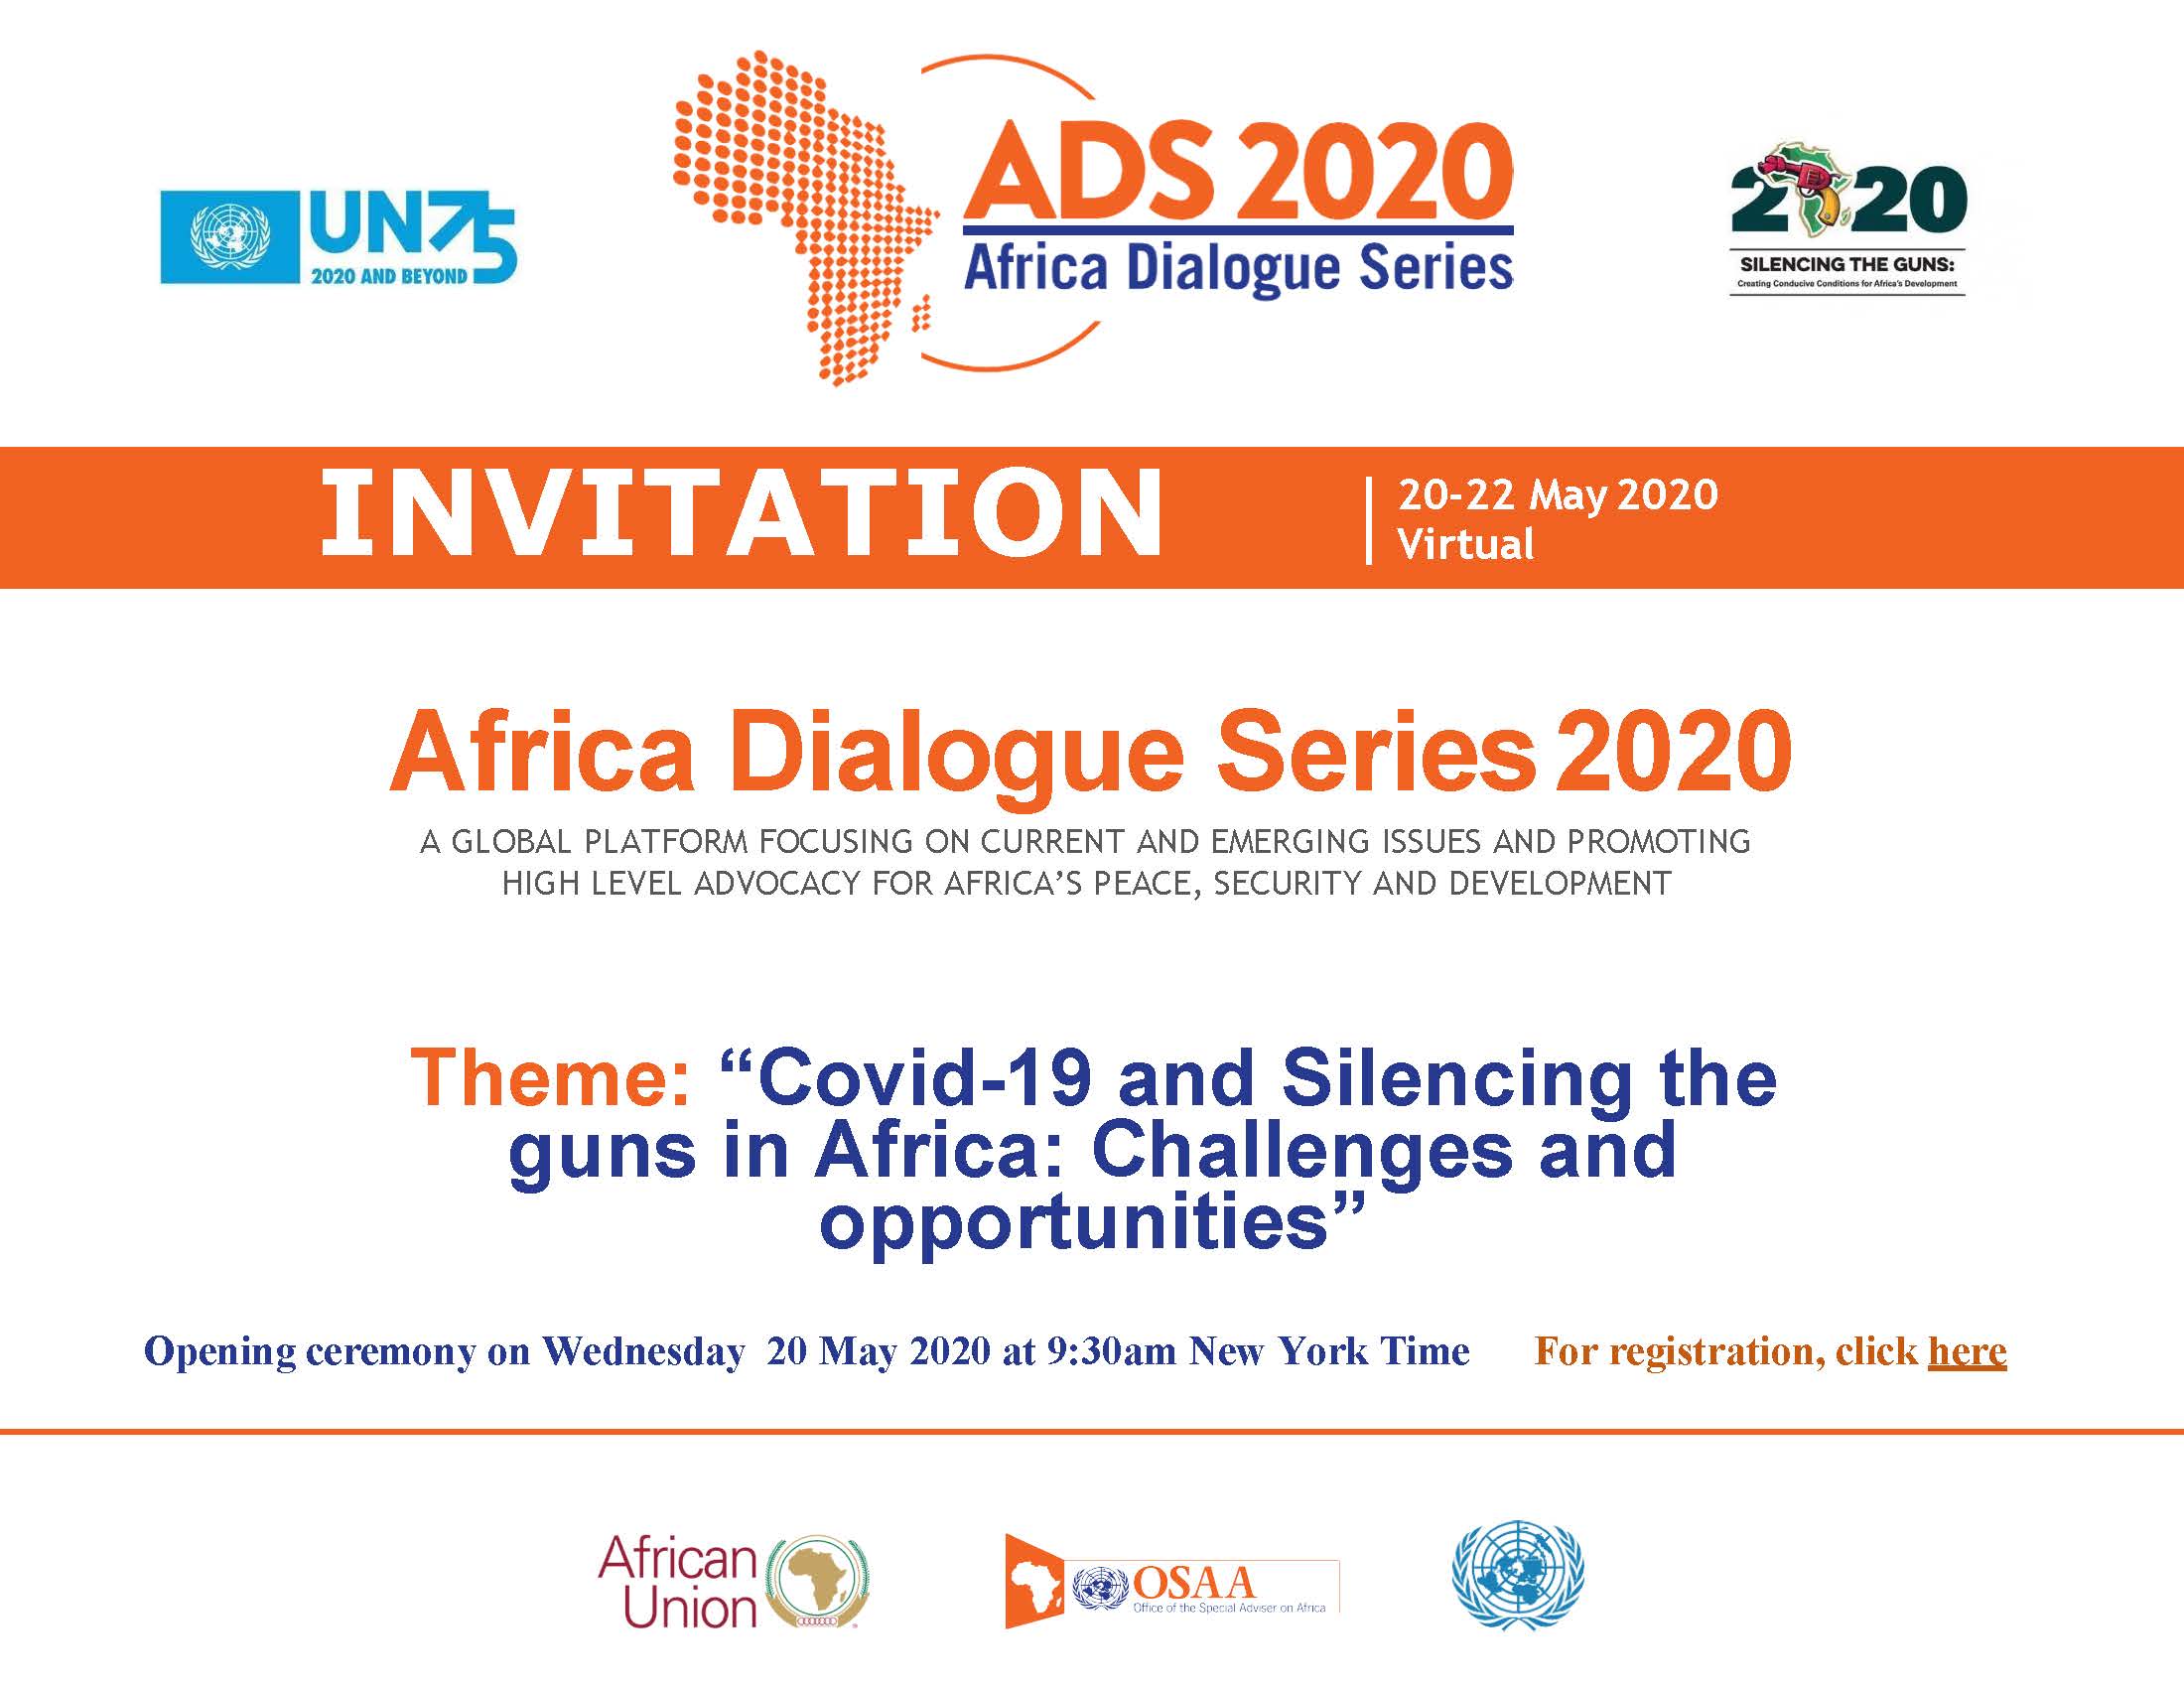 An invitation banner for the ADS 2020